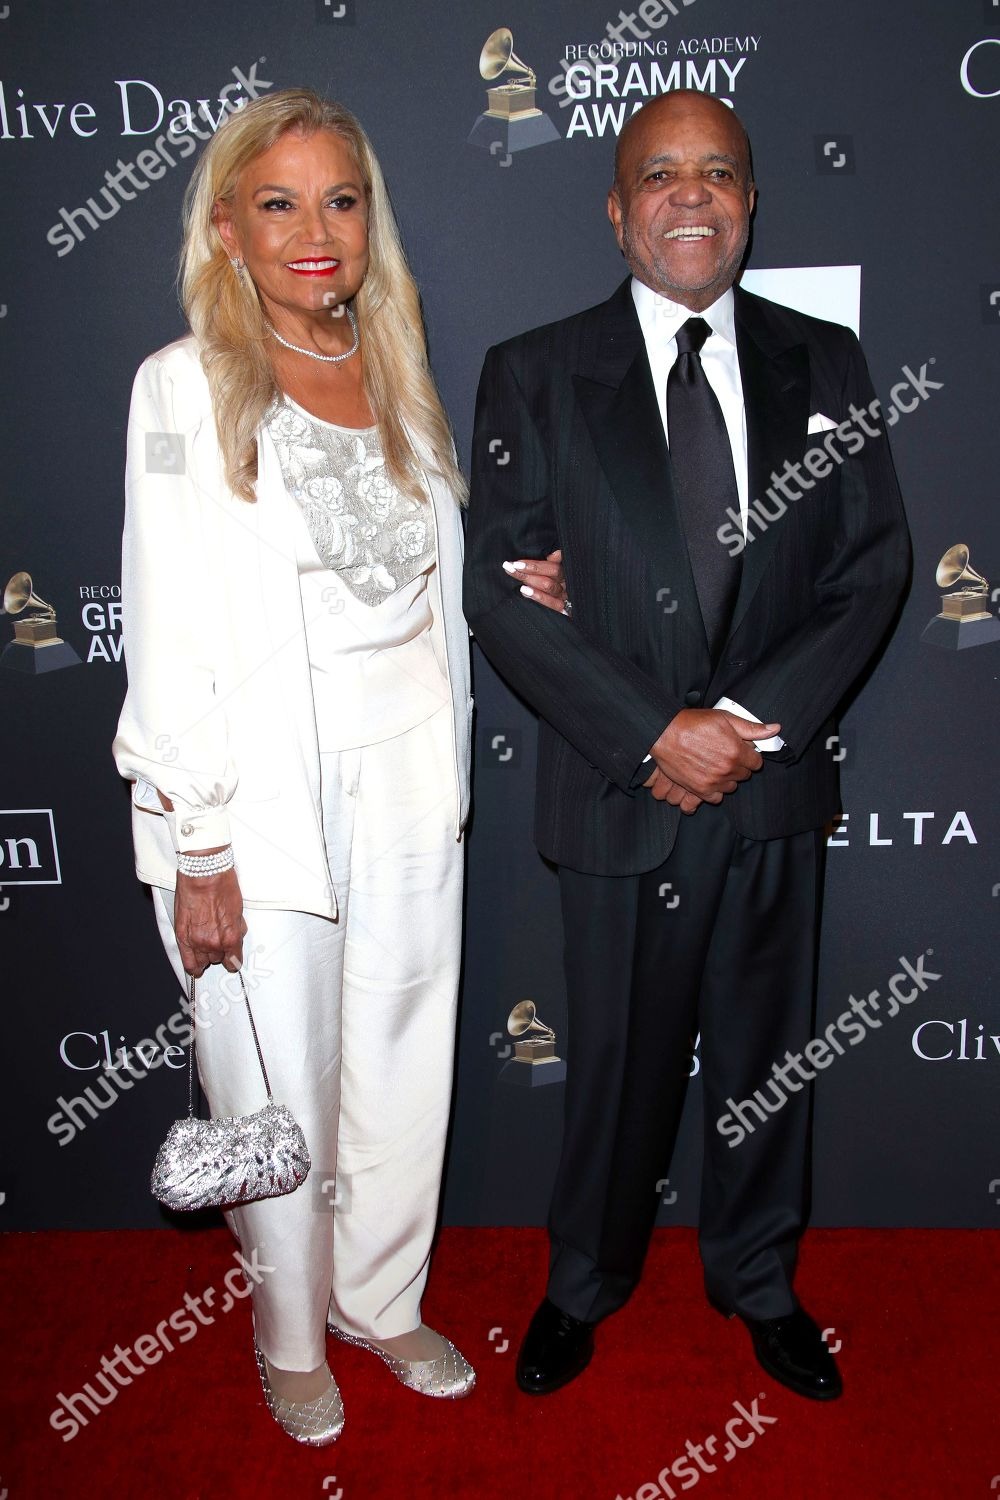  Shutterstock Berry Gordy and Wife HD Stock Images | Shutterstock